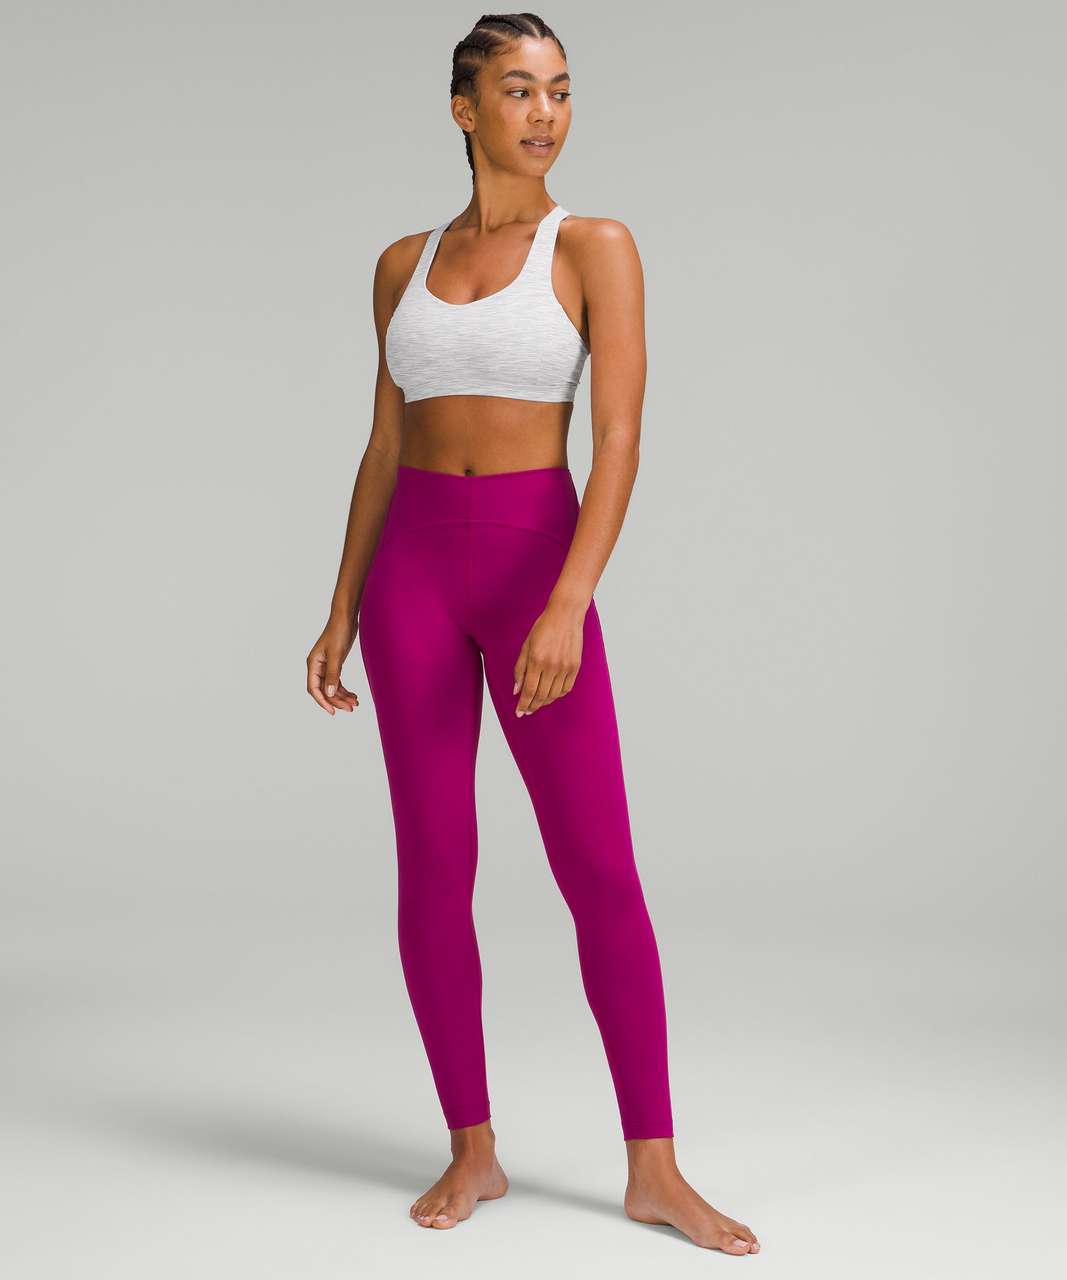 Lululemon Free to Be Serene Bra *Light Support, C/D Cup - Wee Are From Space Nimbus Battleship / Magenta Purple